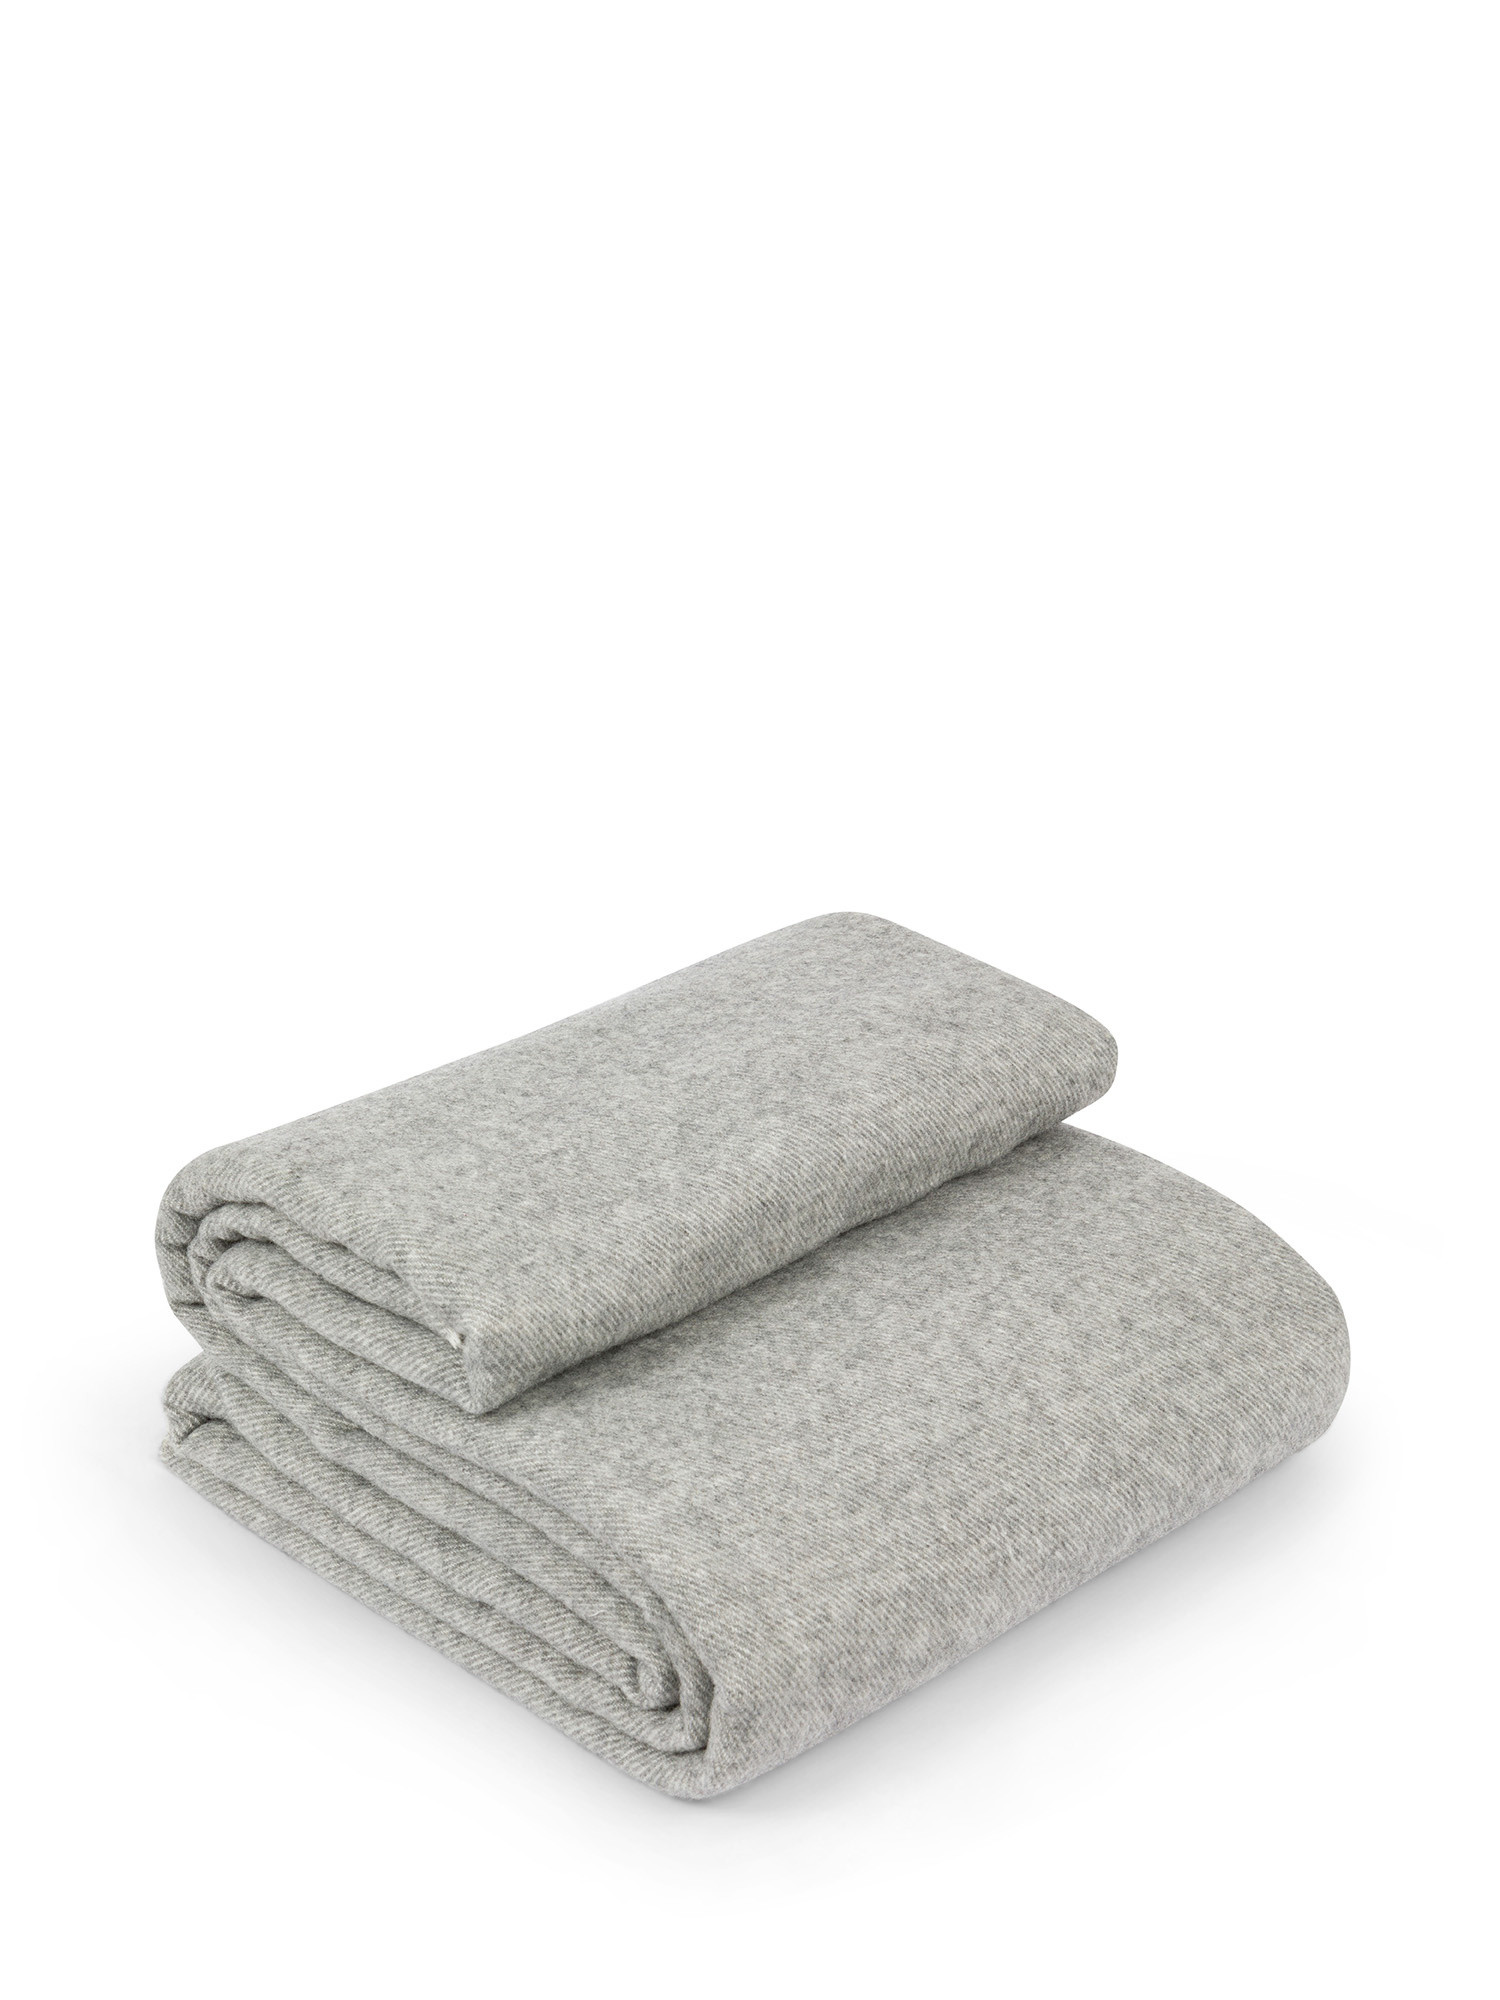 Wool and cotton blanket Portofino, Pearl Grey, large image number 0